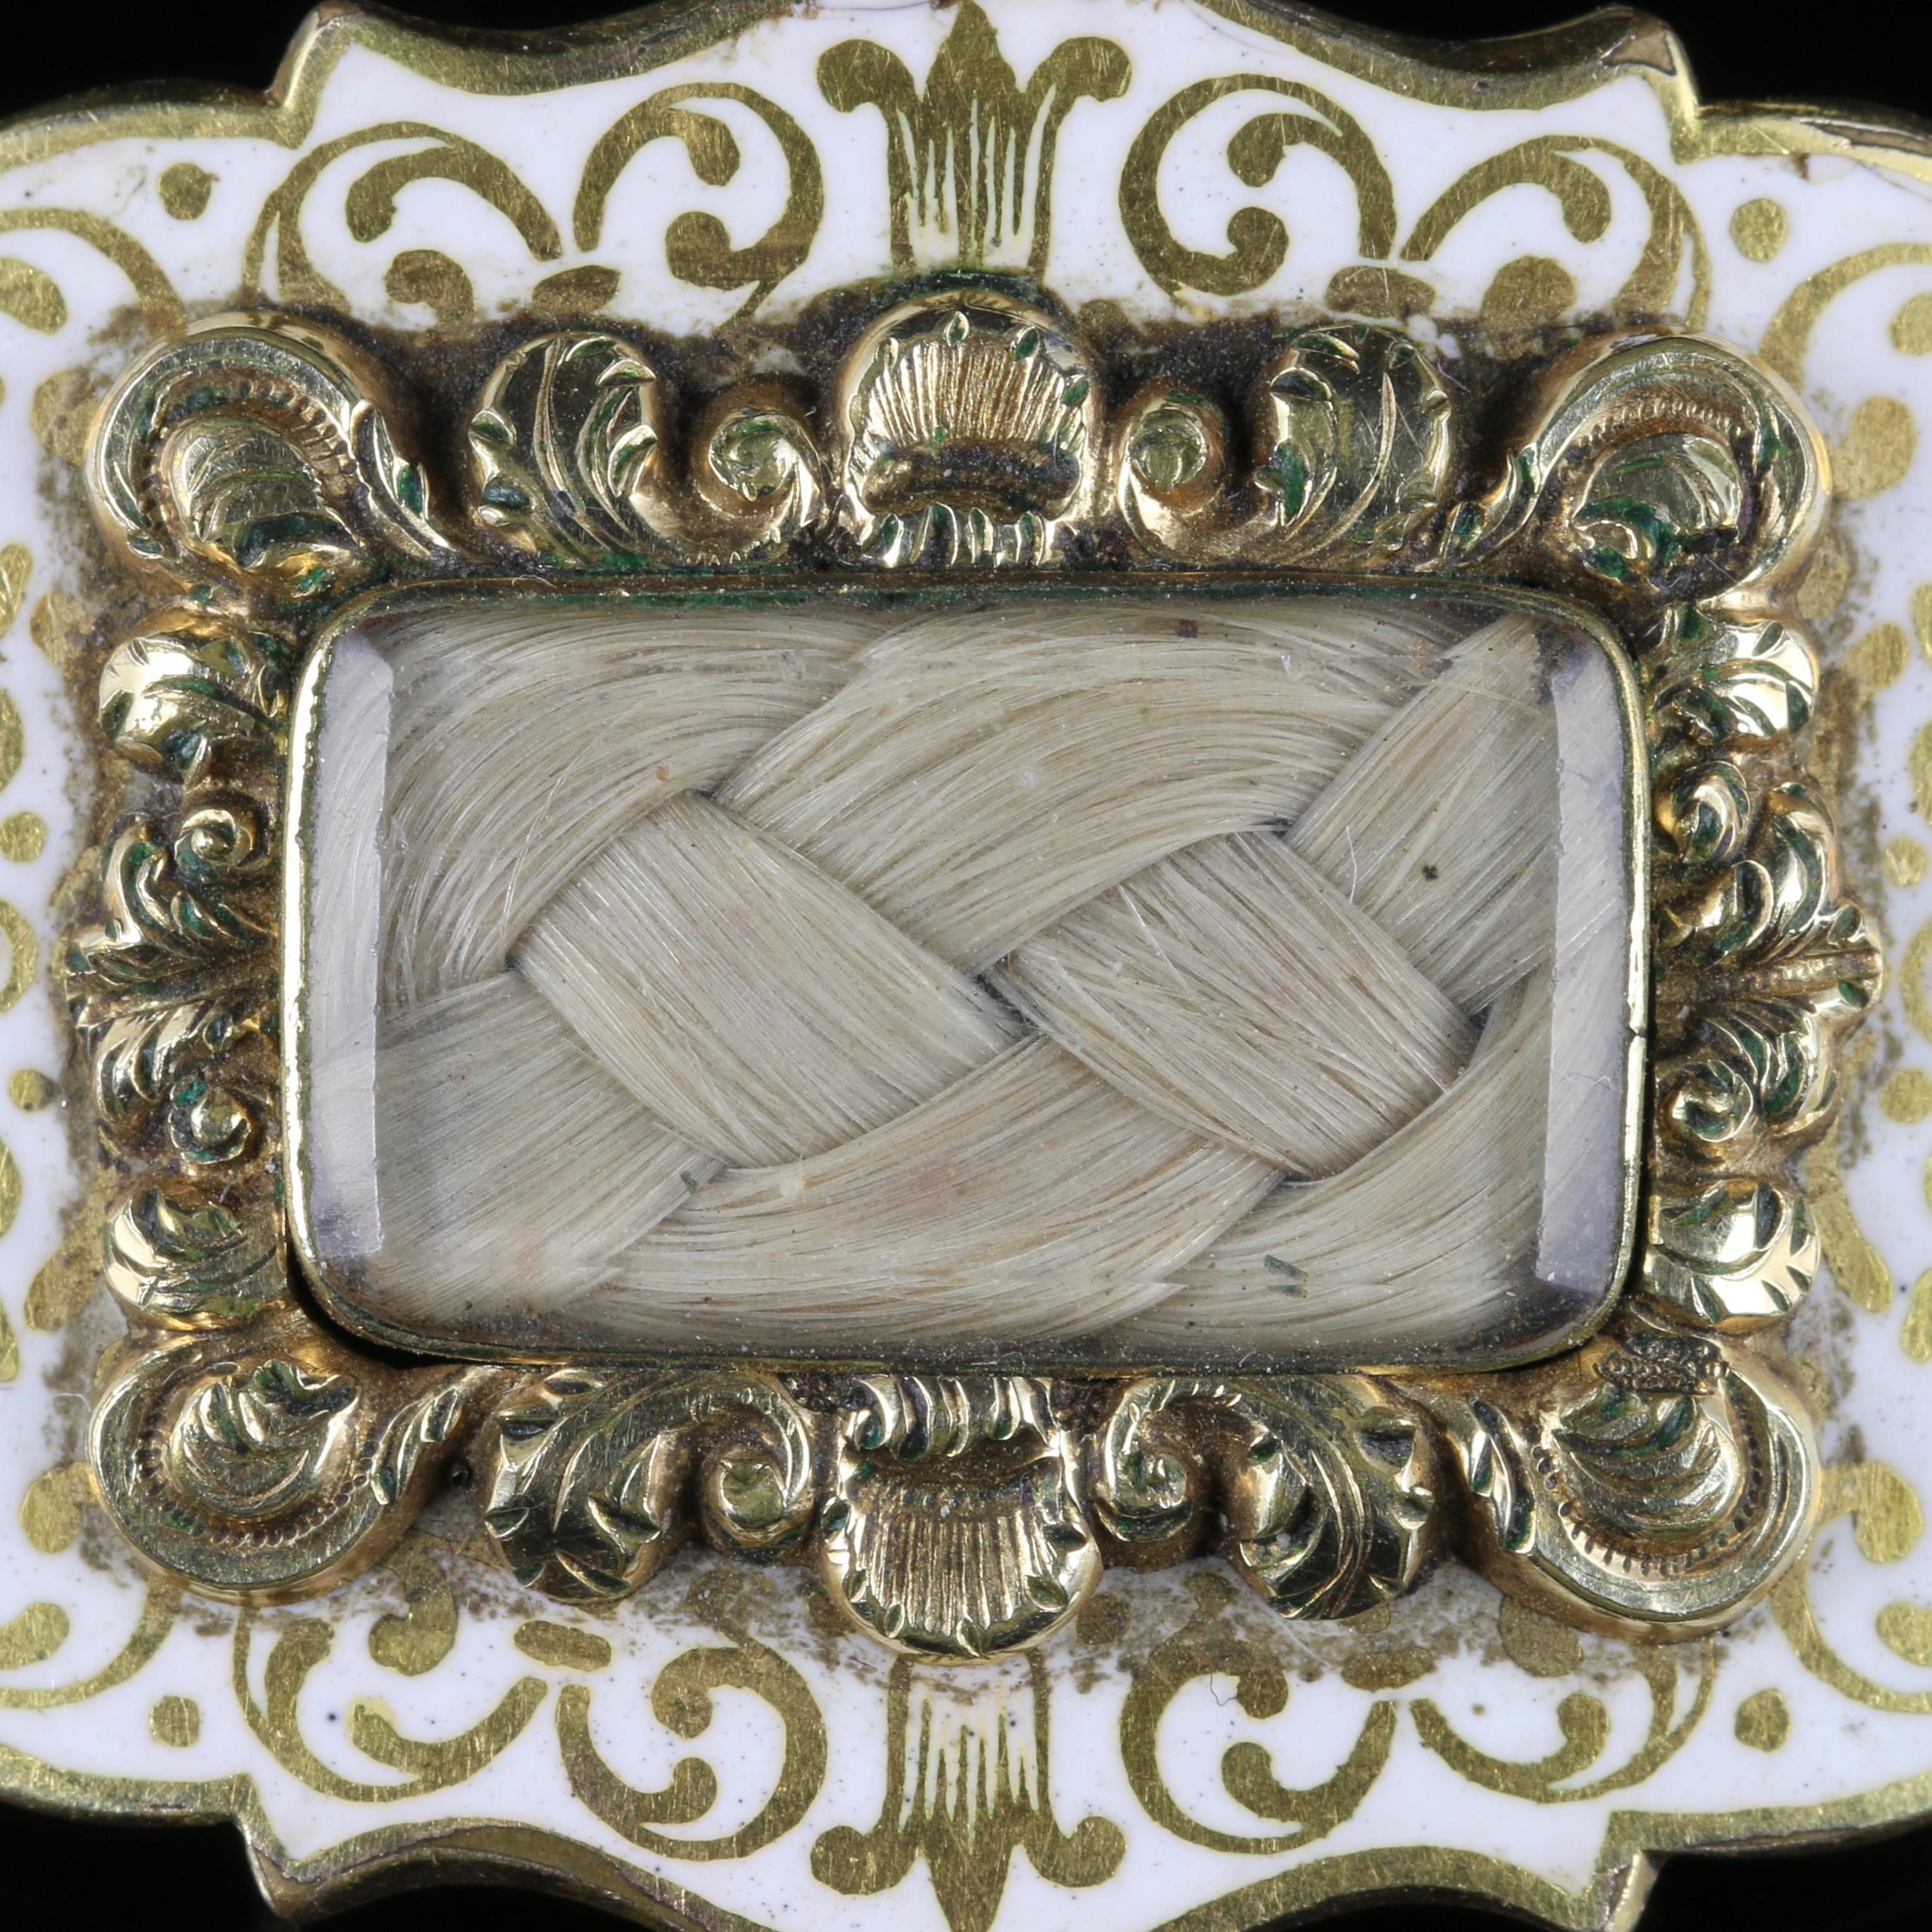 For more details please click continue reading down below...

This lovely antique Victorian childs memorial mourning brooch is Circa 1880.

Set in 9ct Gold and white Enamel.

Mourning jewellery mirrored the lives and times of the people who wore it.